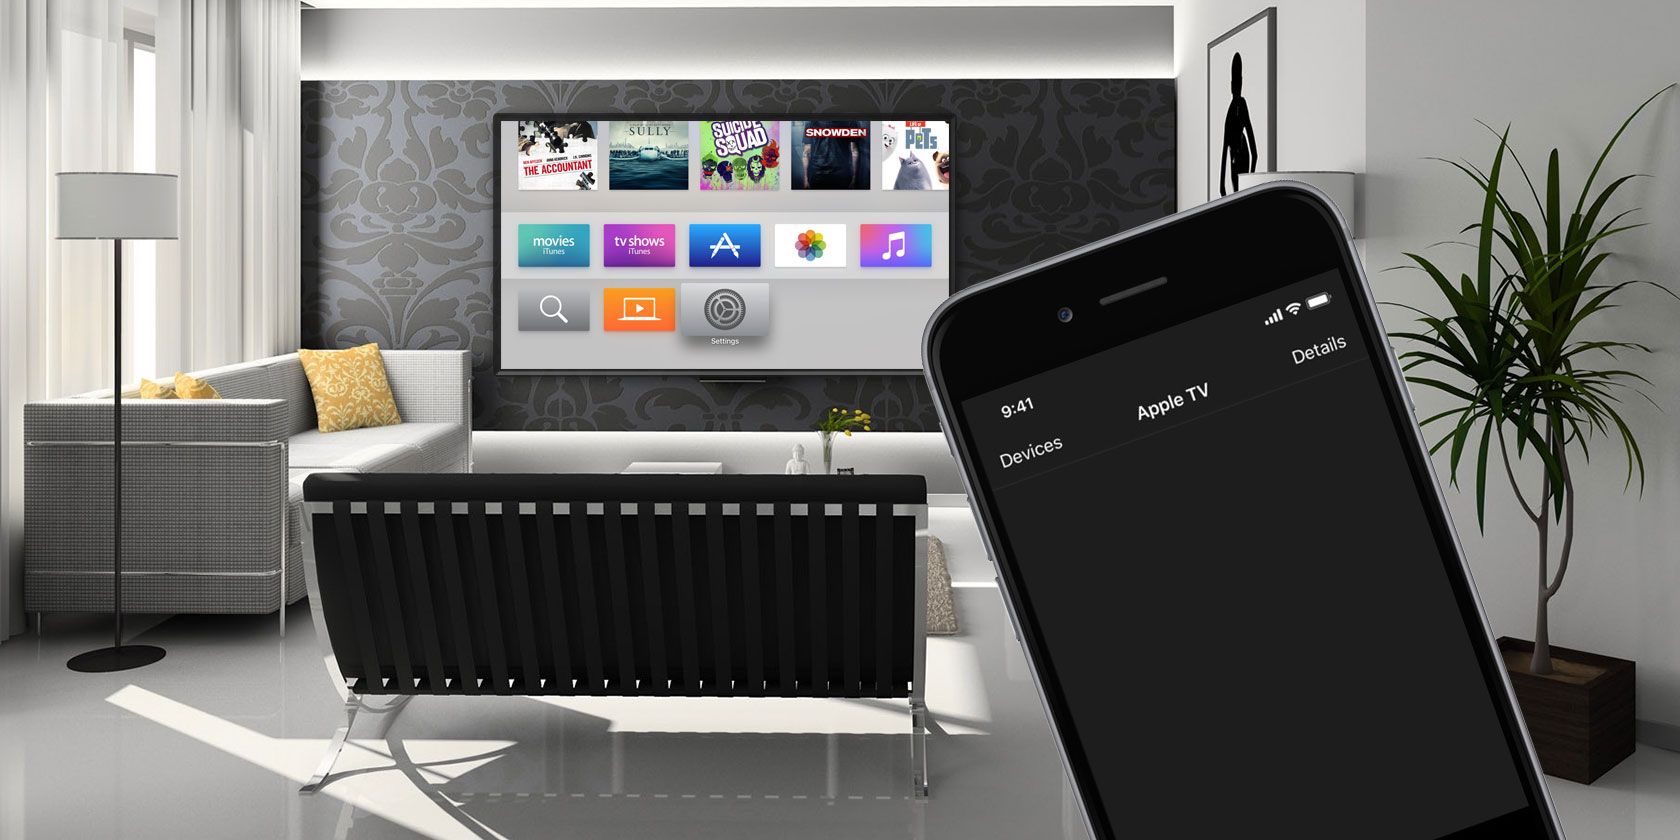 How to Remote Control Your Apple TV With an iPhone or iPad